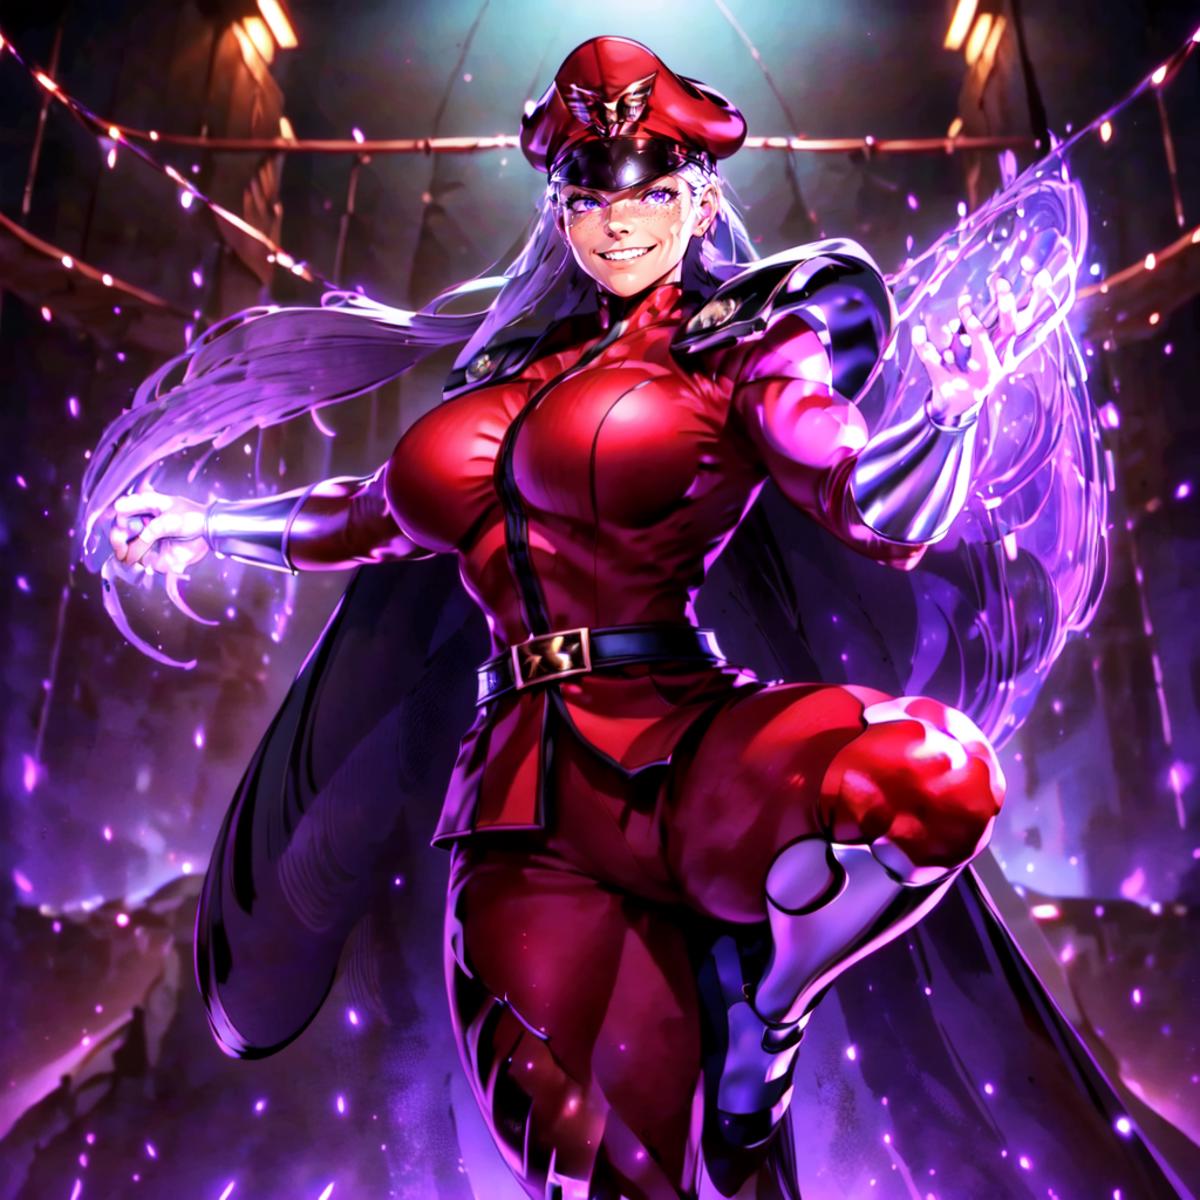 M. Bison (Female) from Street Fighter image by Bloodysunkist